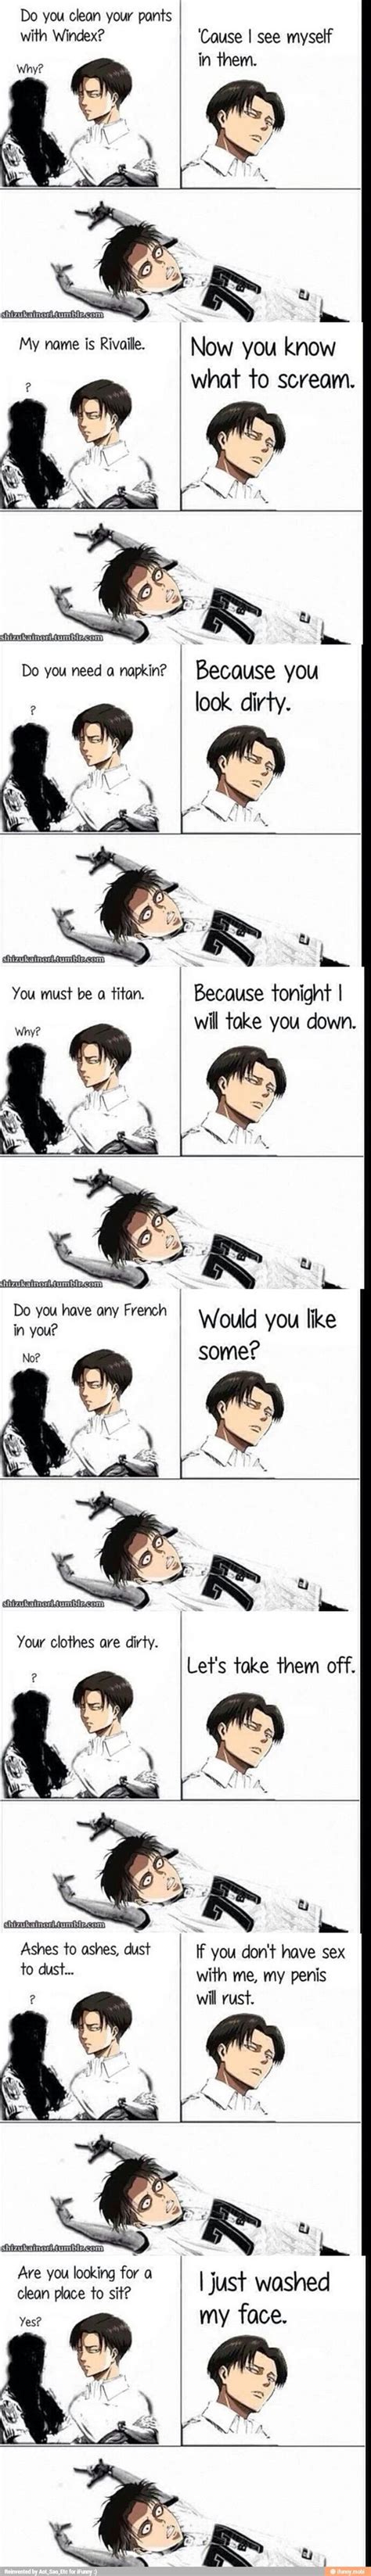 Aot Ifunny Attack On Titan Pick Up Lines Attack On Titan Funny